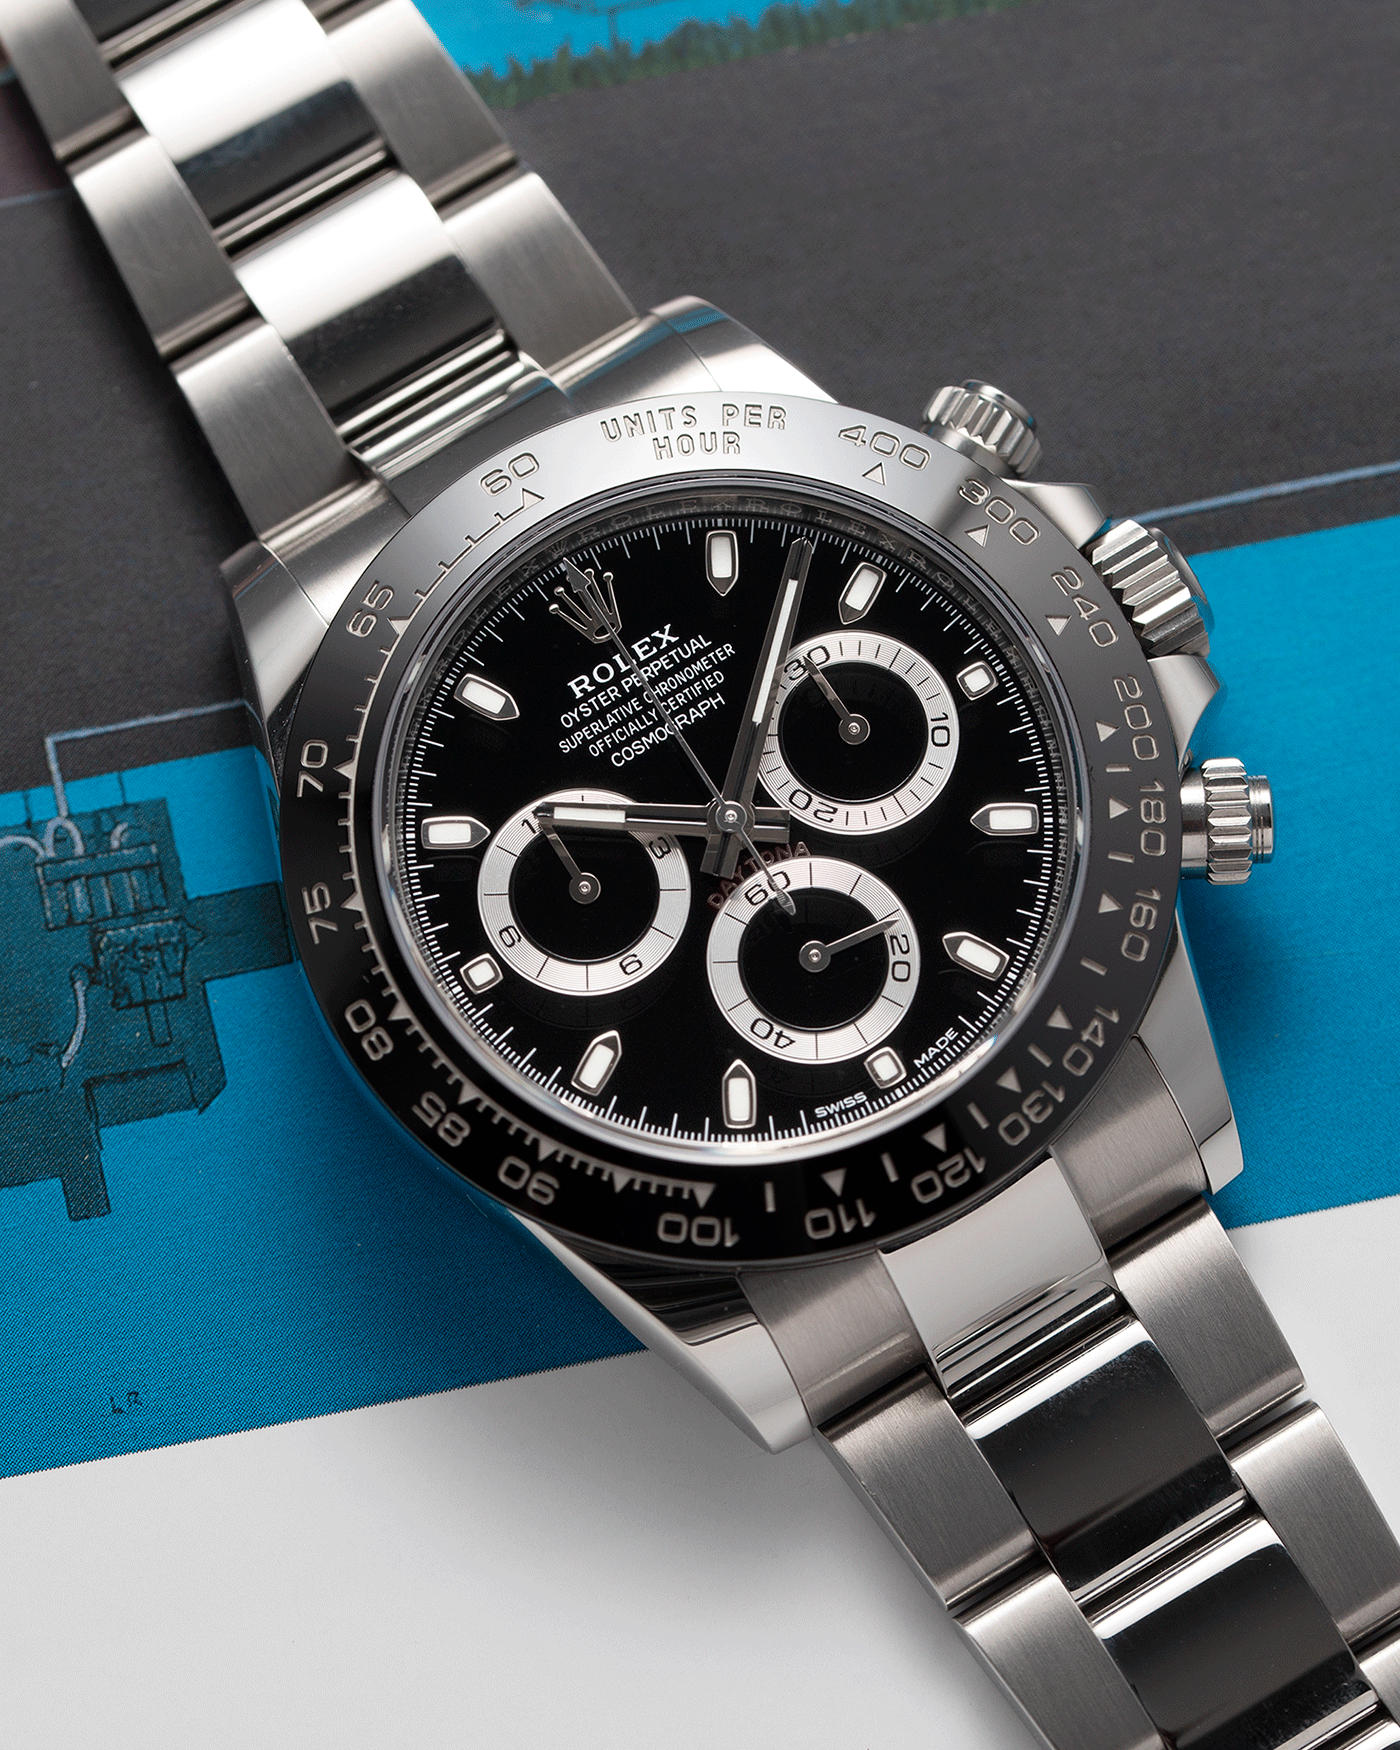 Rolex Cosmograph Daytona 116500 Chronograph Watch S.Song Timepieces –